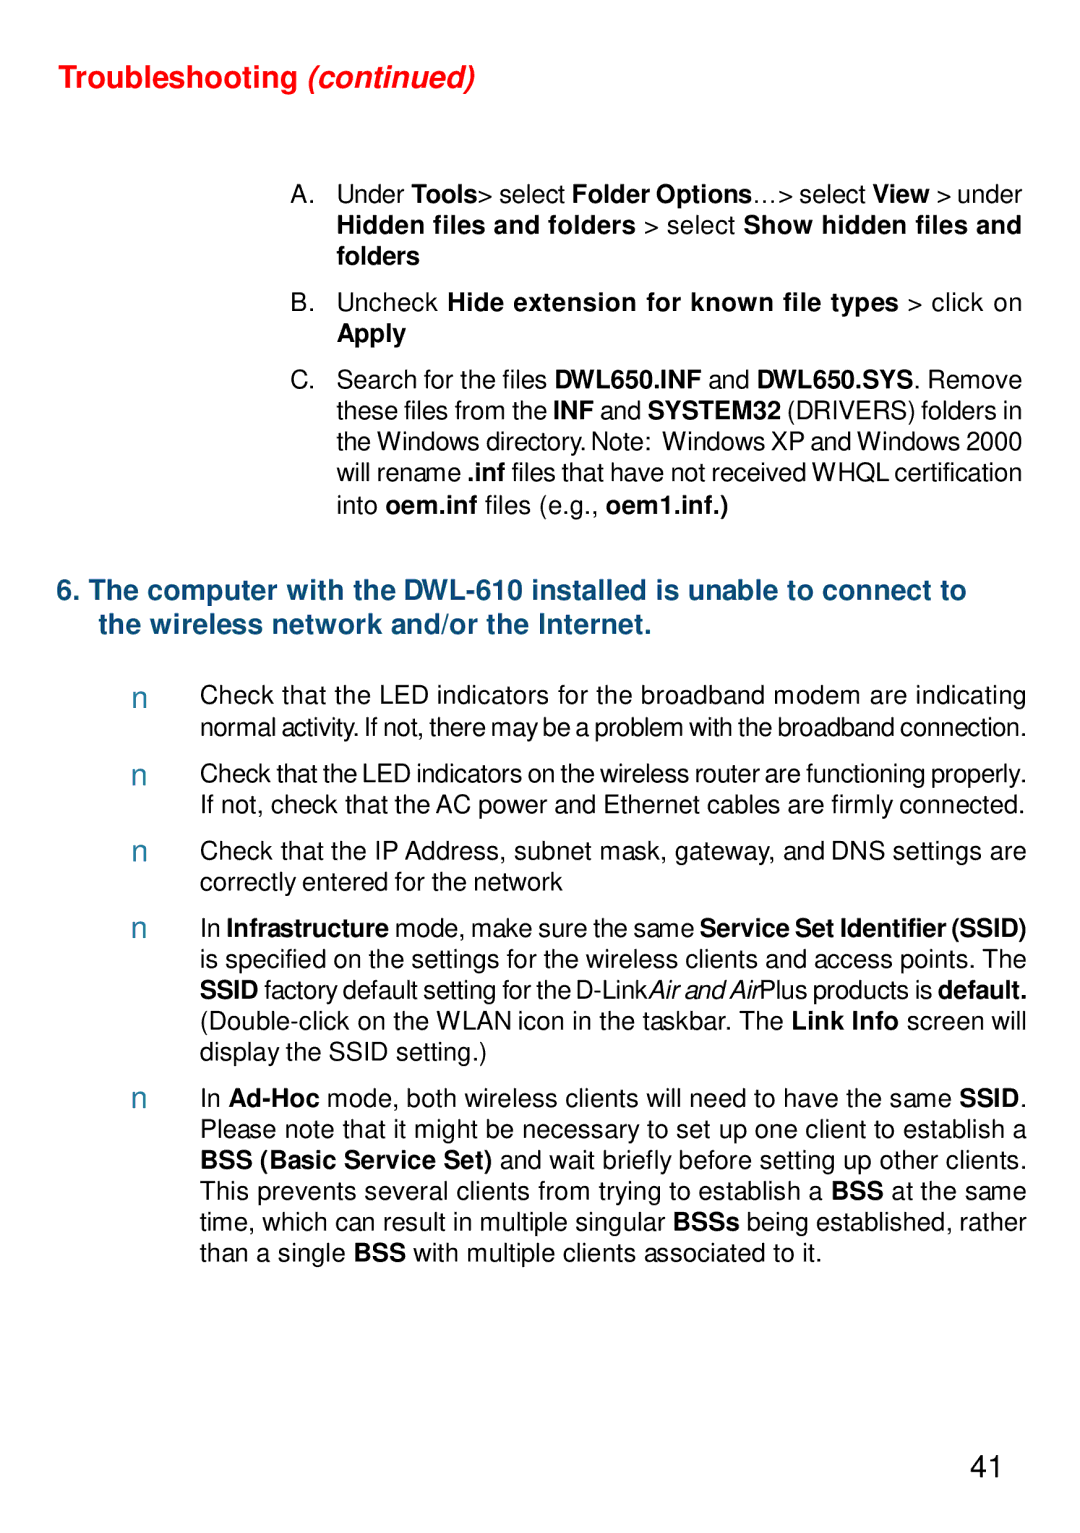 D-Link DWL-610 manual Uncheck Hide extension for known file types click on Apply 